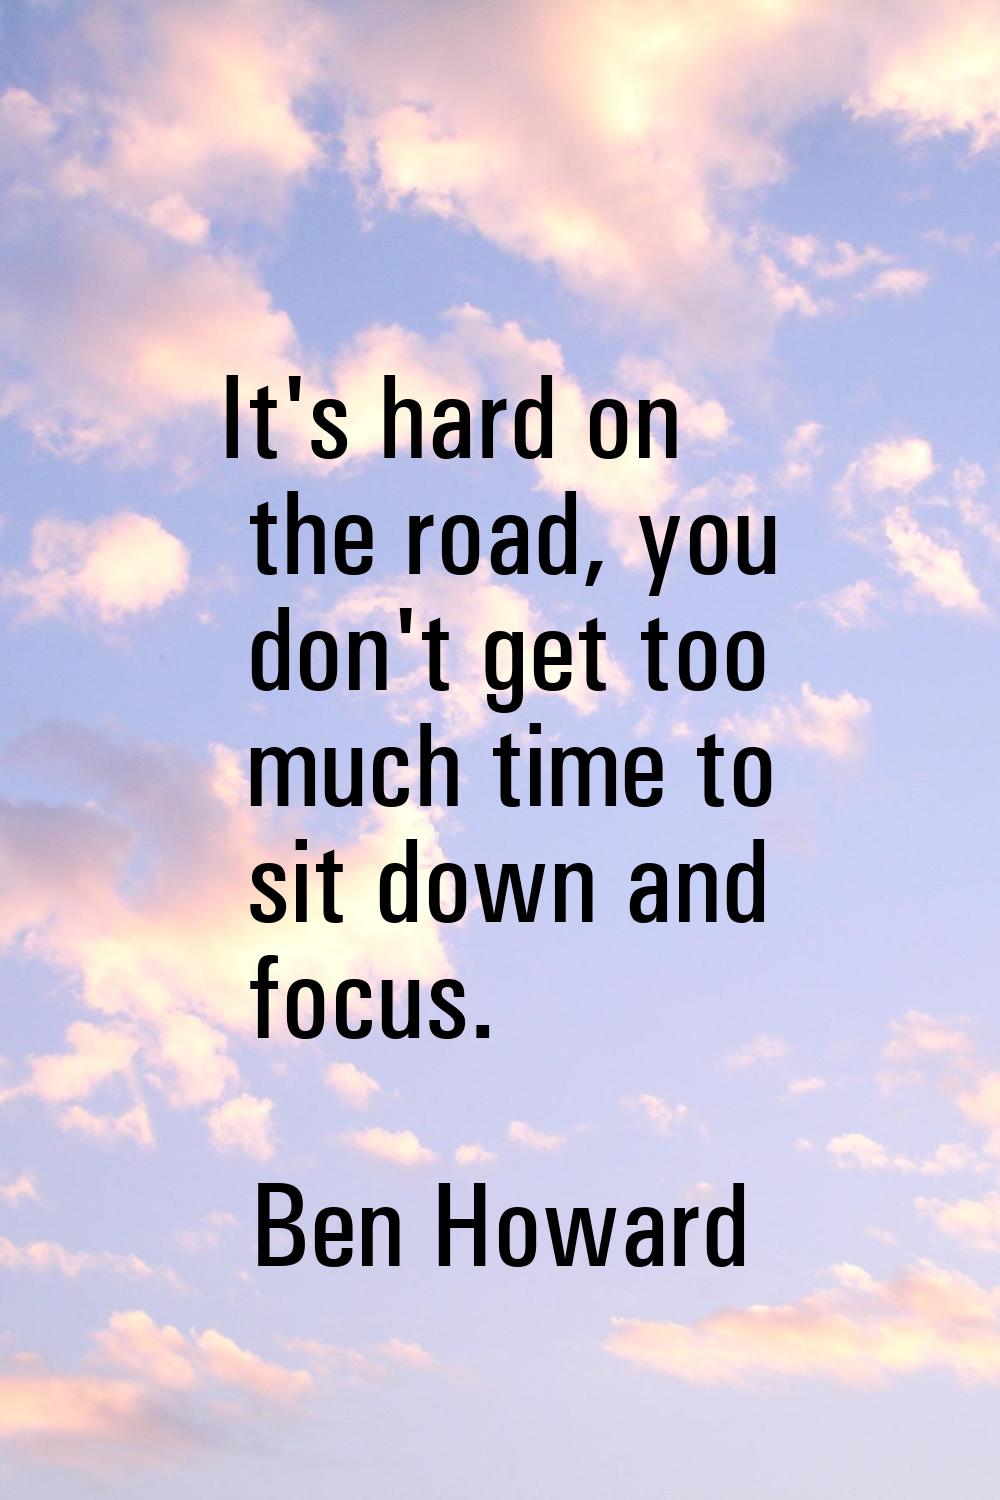 It's hard on the road, you don't get too much time to sit down and focus.